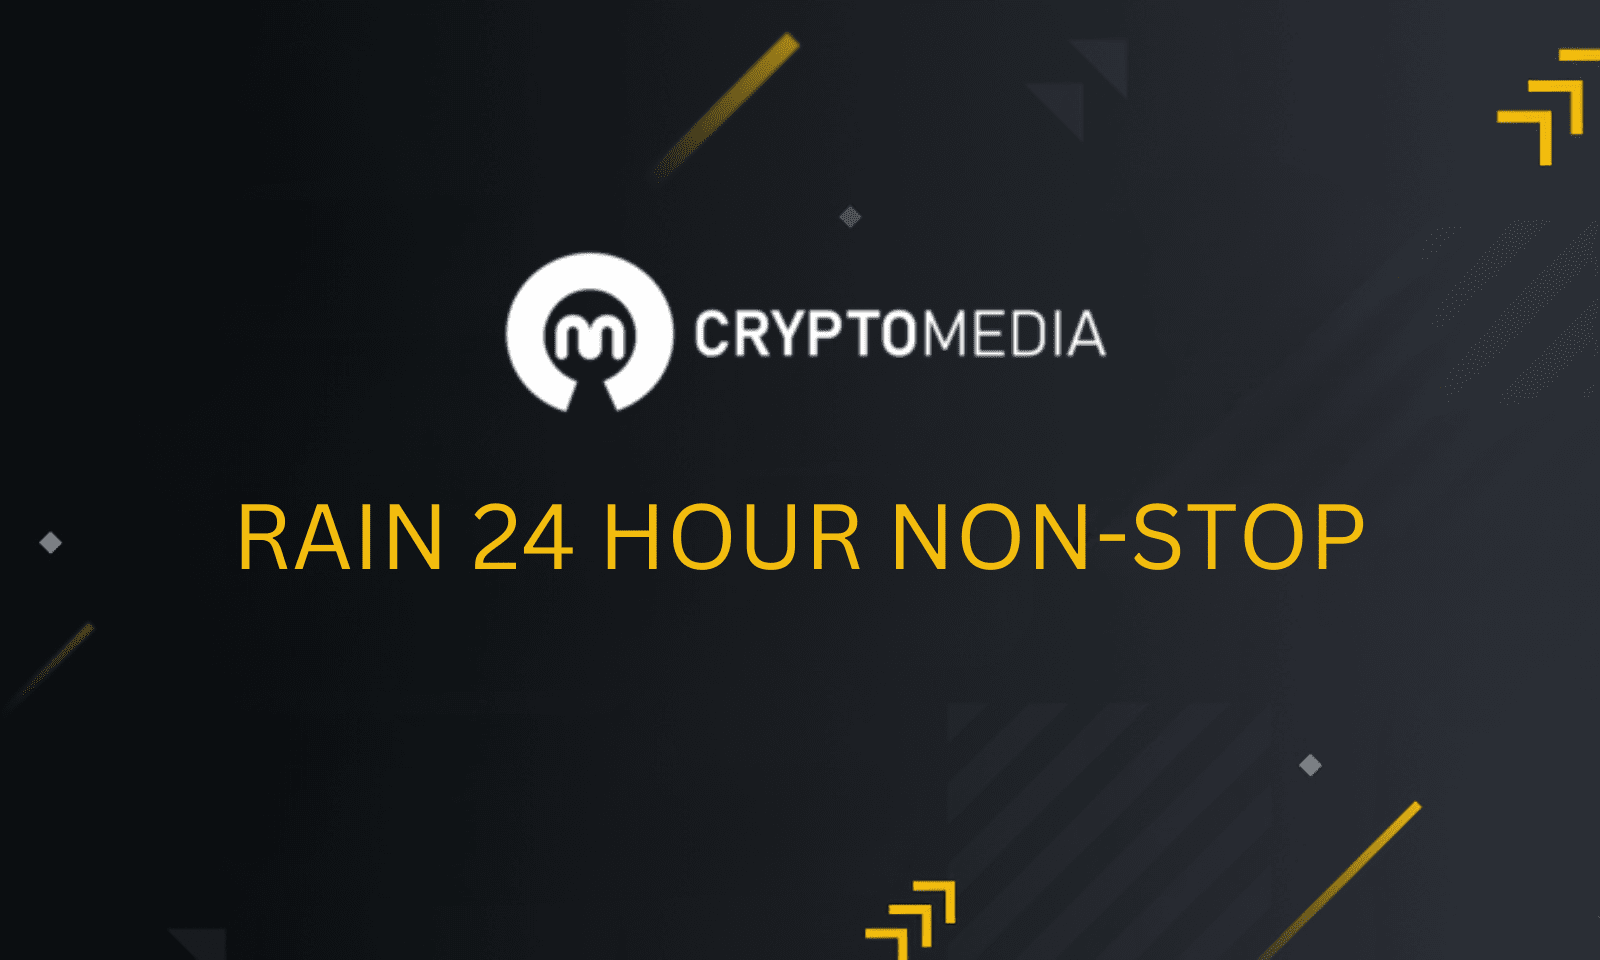 LIVE BTC WITH ANALYSIS 24 HOURS NON-STOP